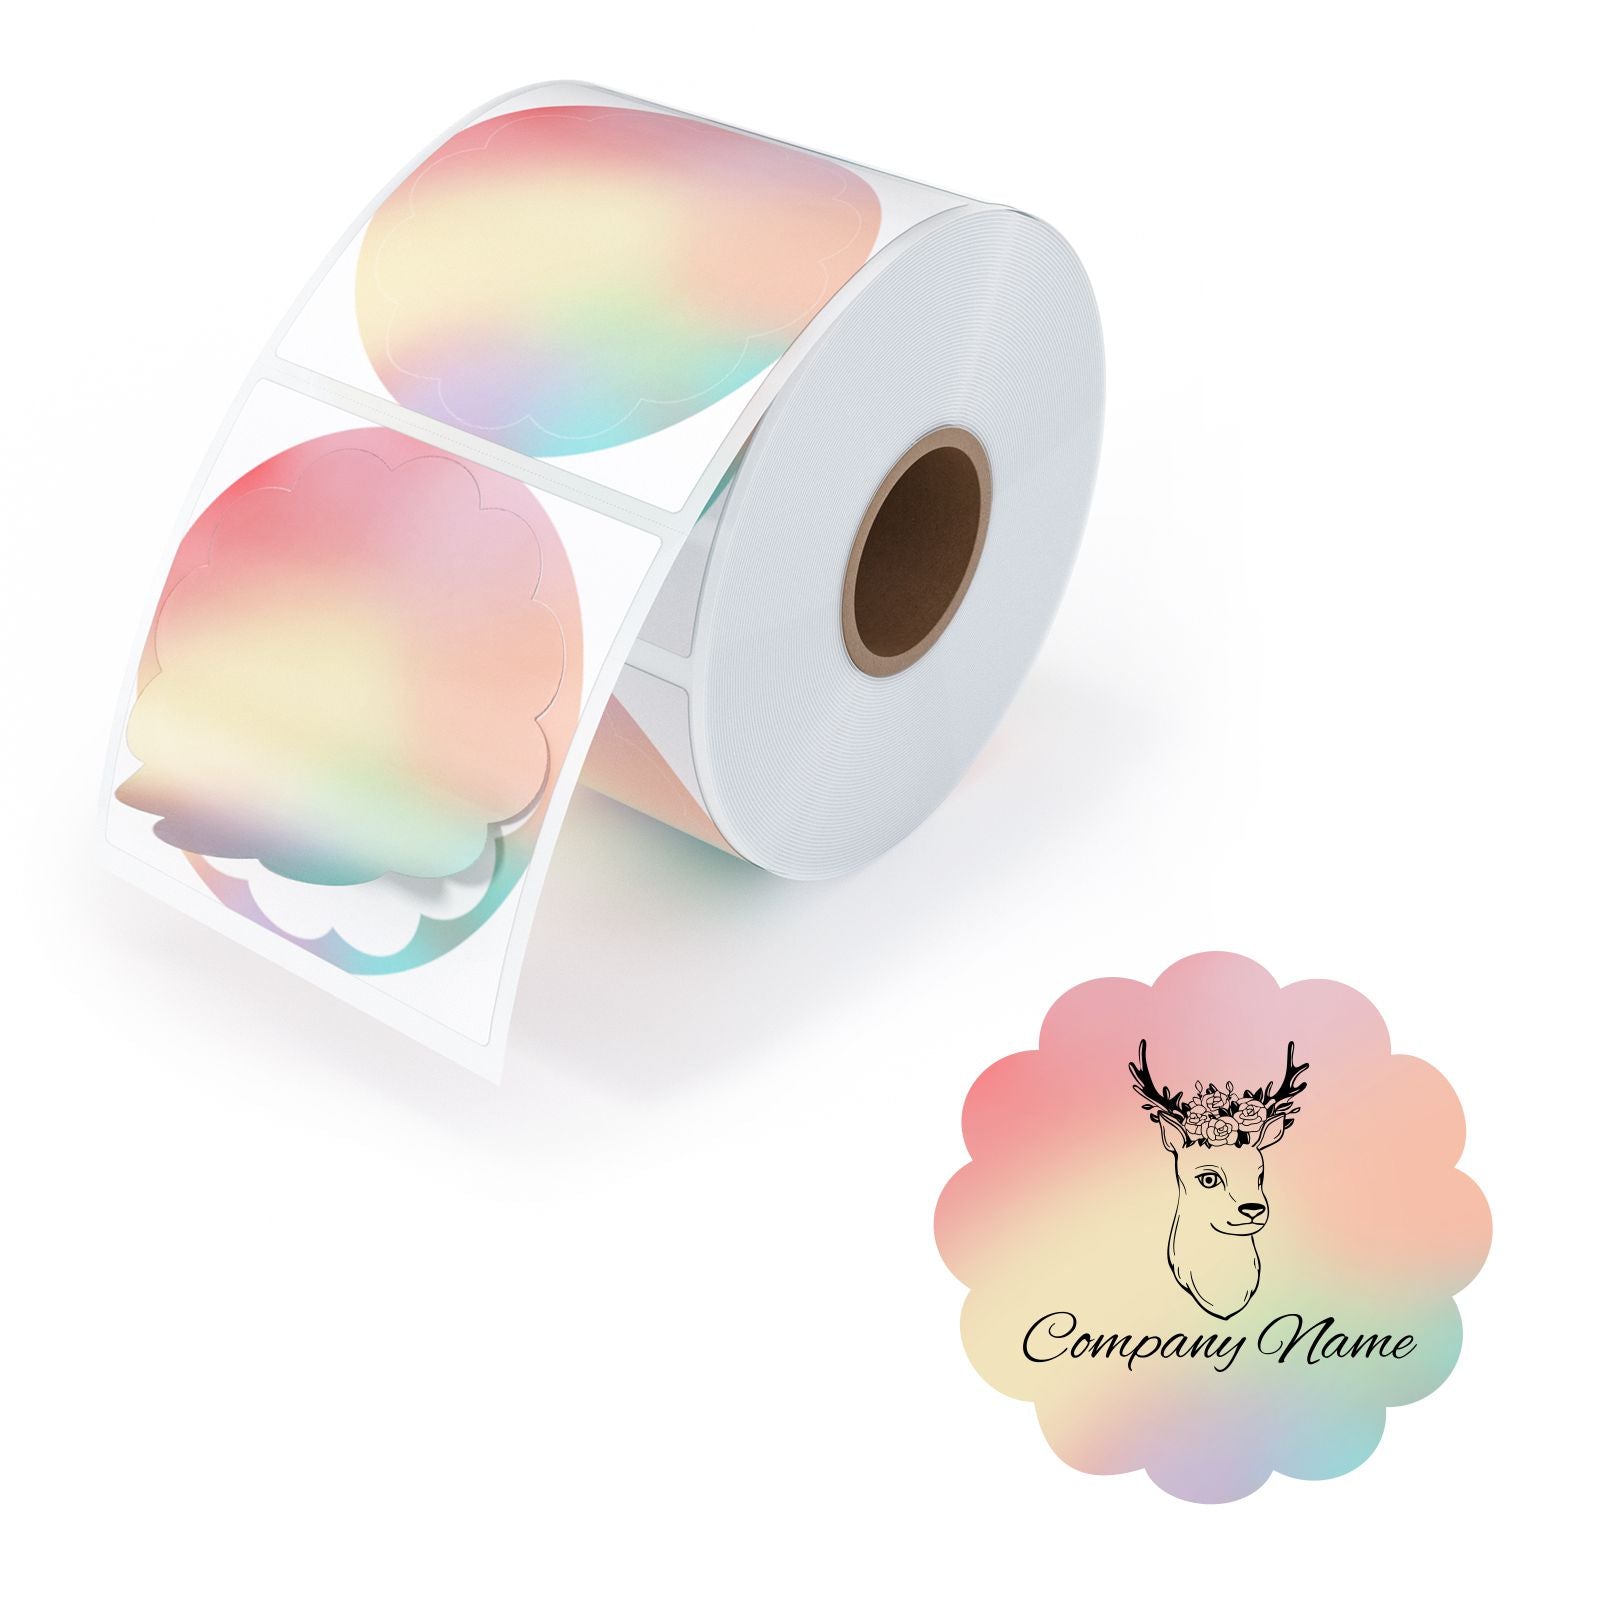 MUNBYN rainbow-coloured thermal labels are suitable for users to print stickers at home.